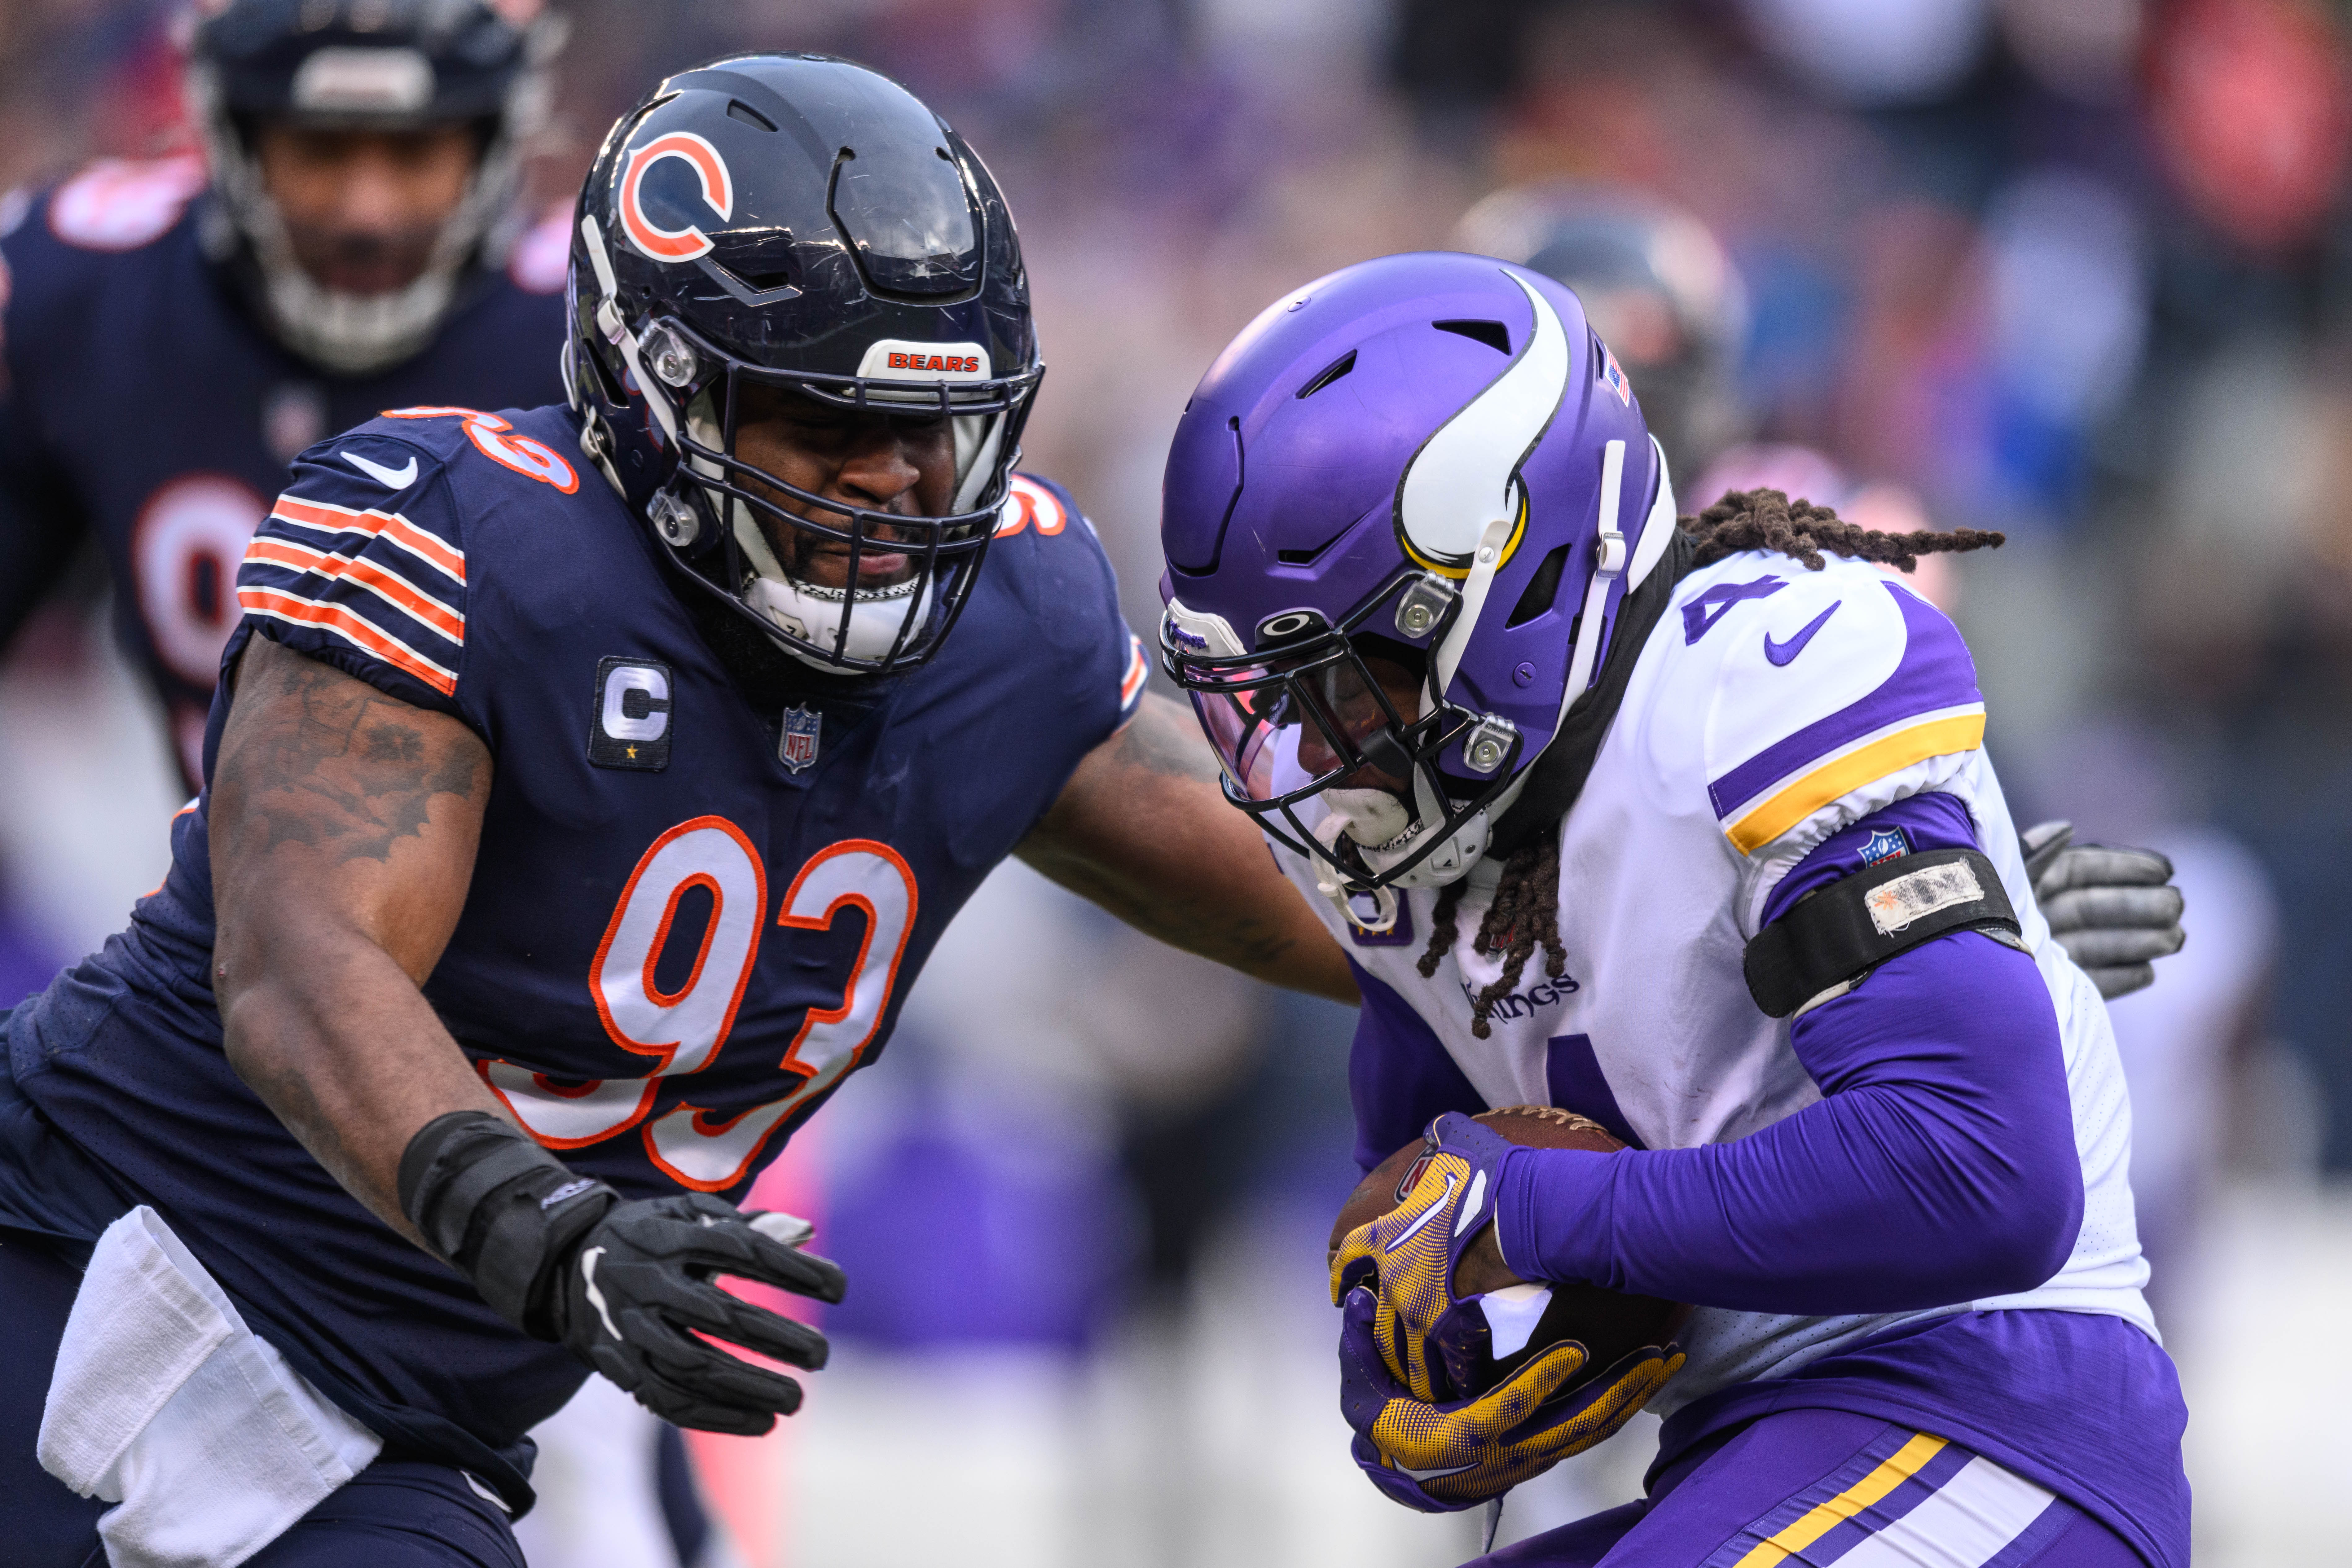 Minnesota Vikings running back Dalvin Cook (4) runs the ball and is tackled by Chicago Bears defensive tackle Justin Jones (93) during the first quarter at Soldier Field.